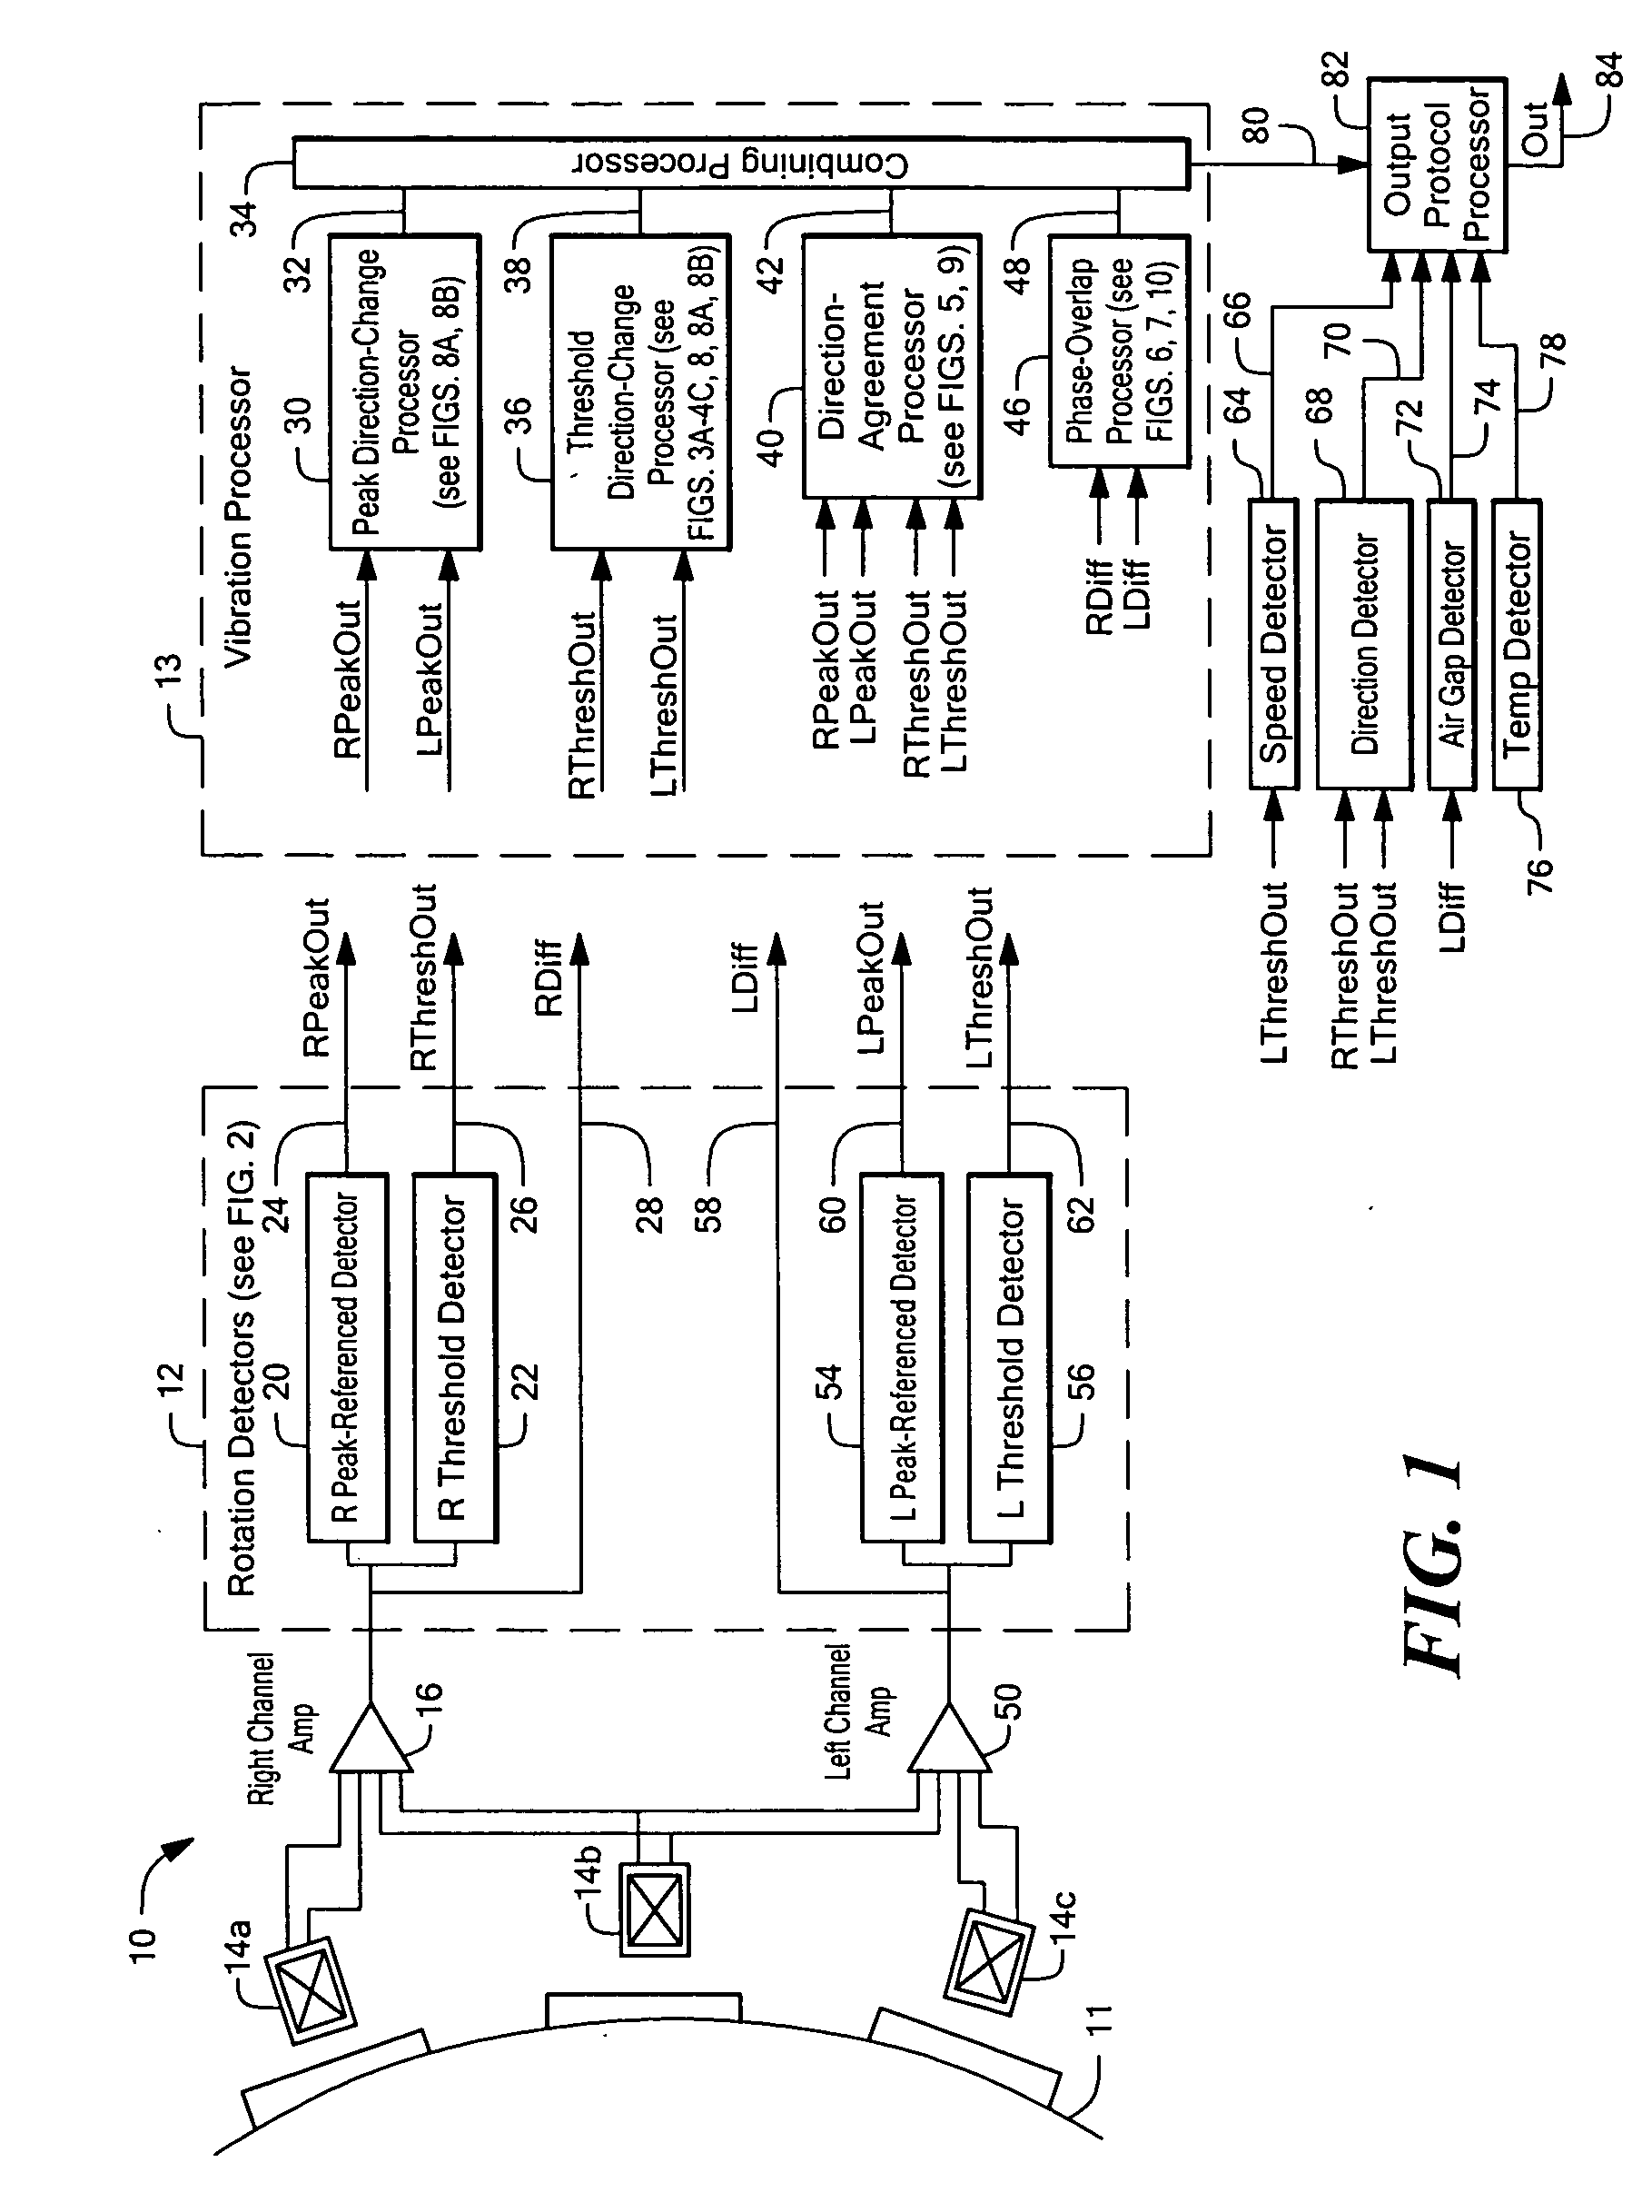 Method and apparatus for vibration detection